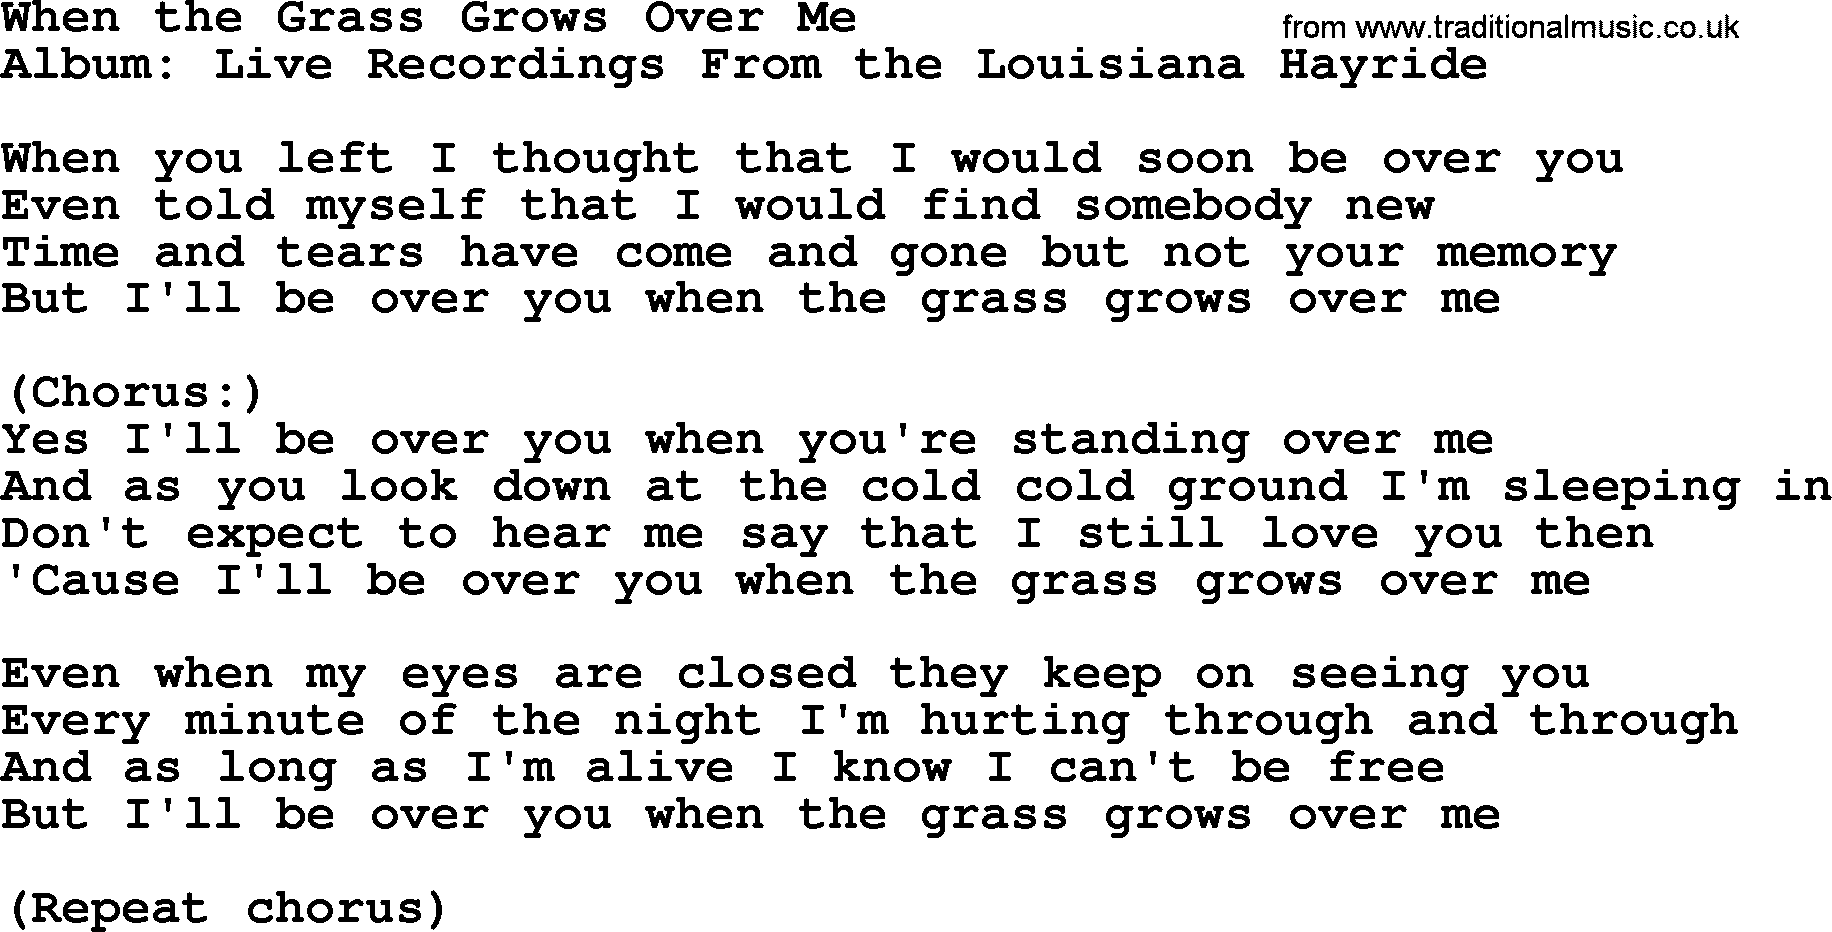 George Jones song: When The Grass Grows Over Me, lyrics